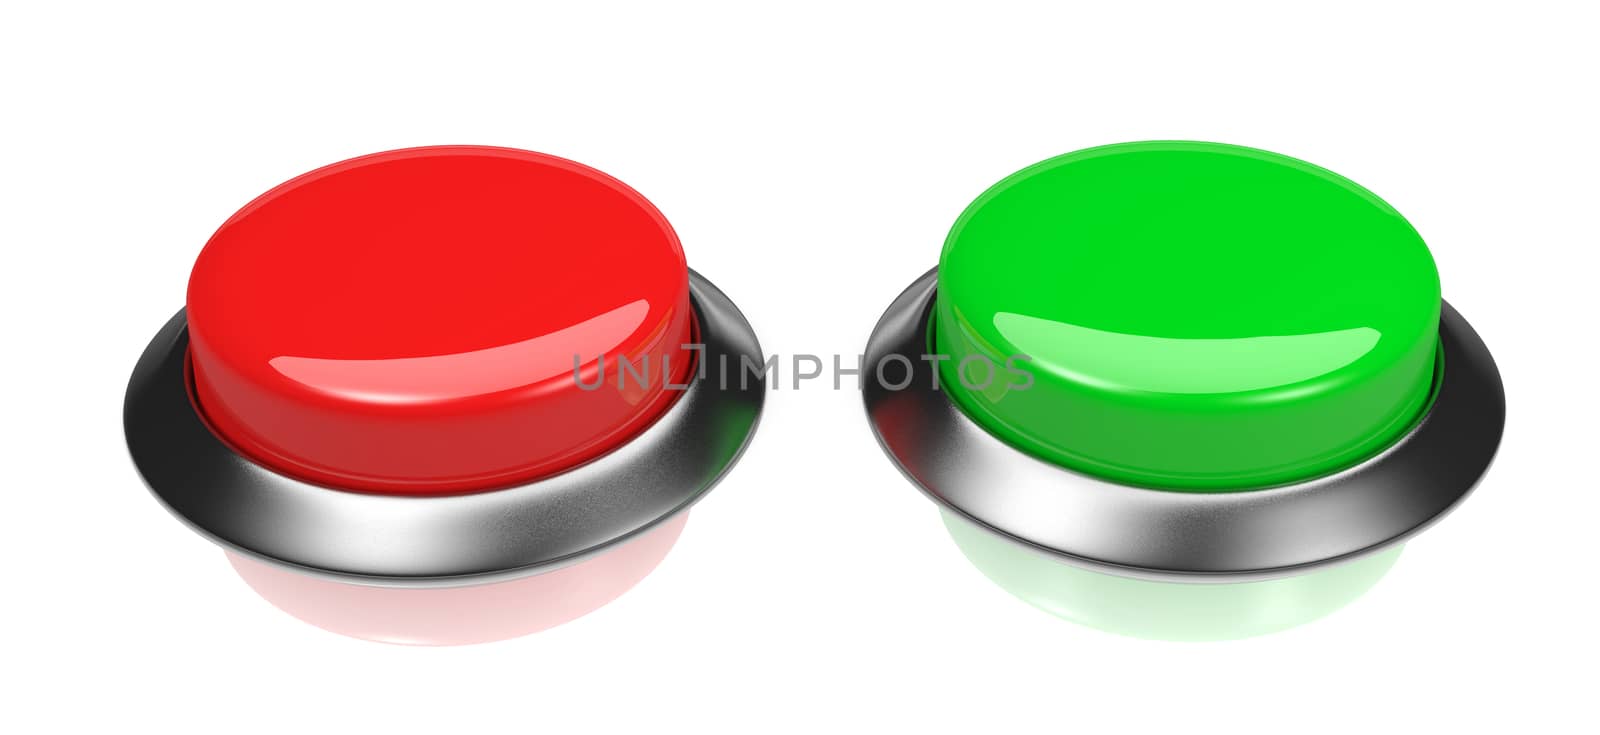 Two Red and Green Glossy Buttons on White Background 3D Illustration